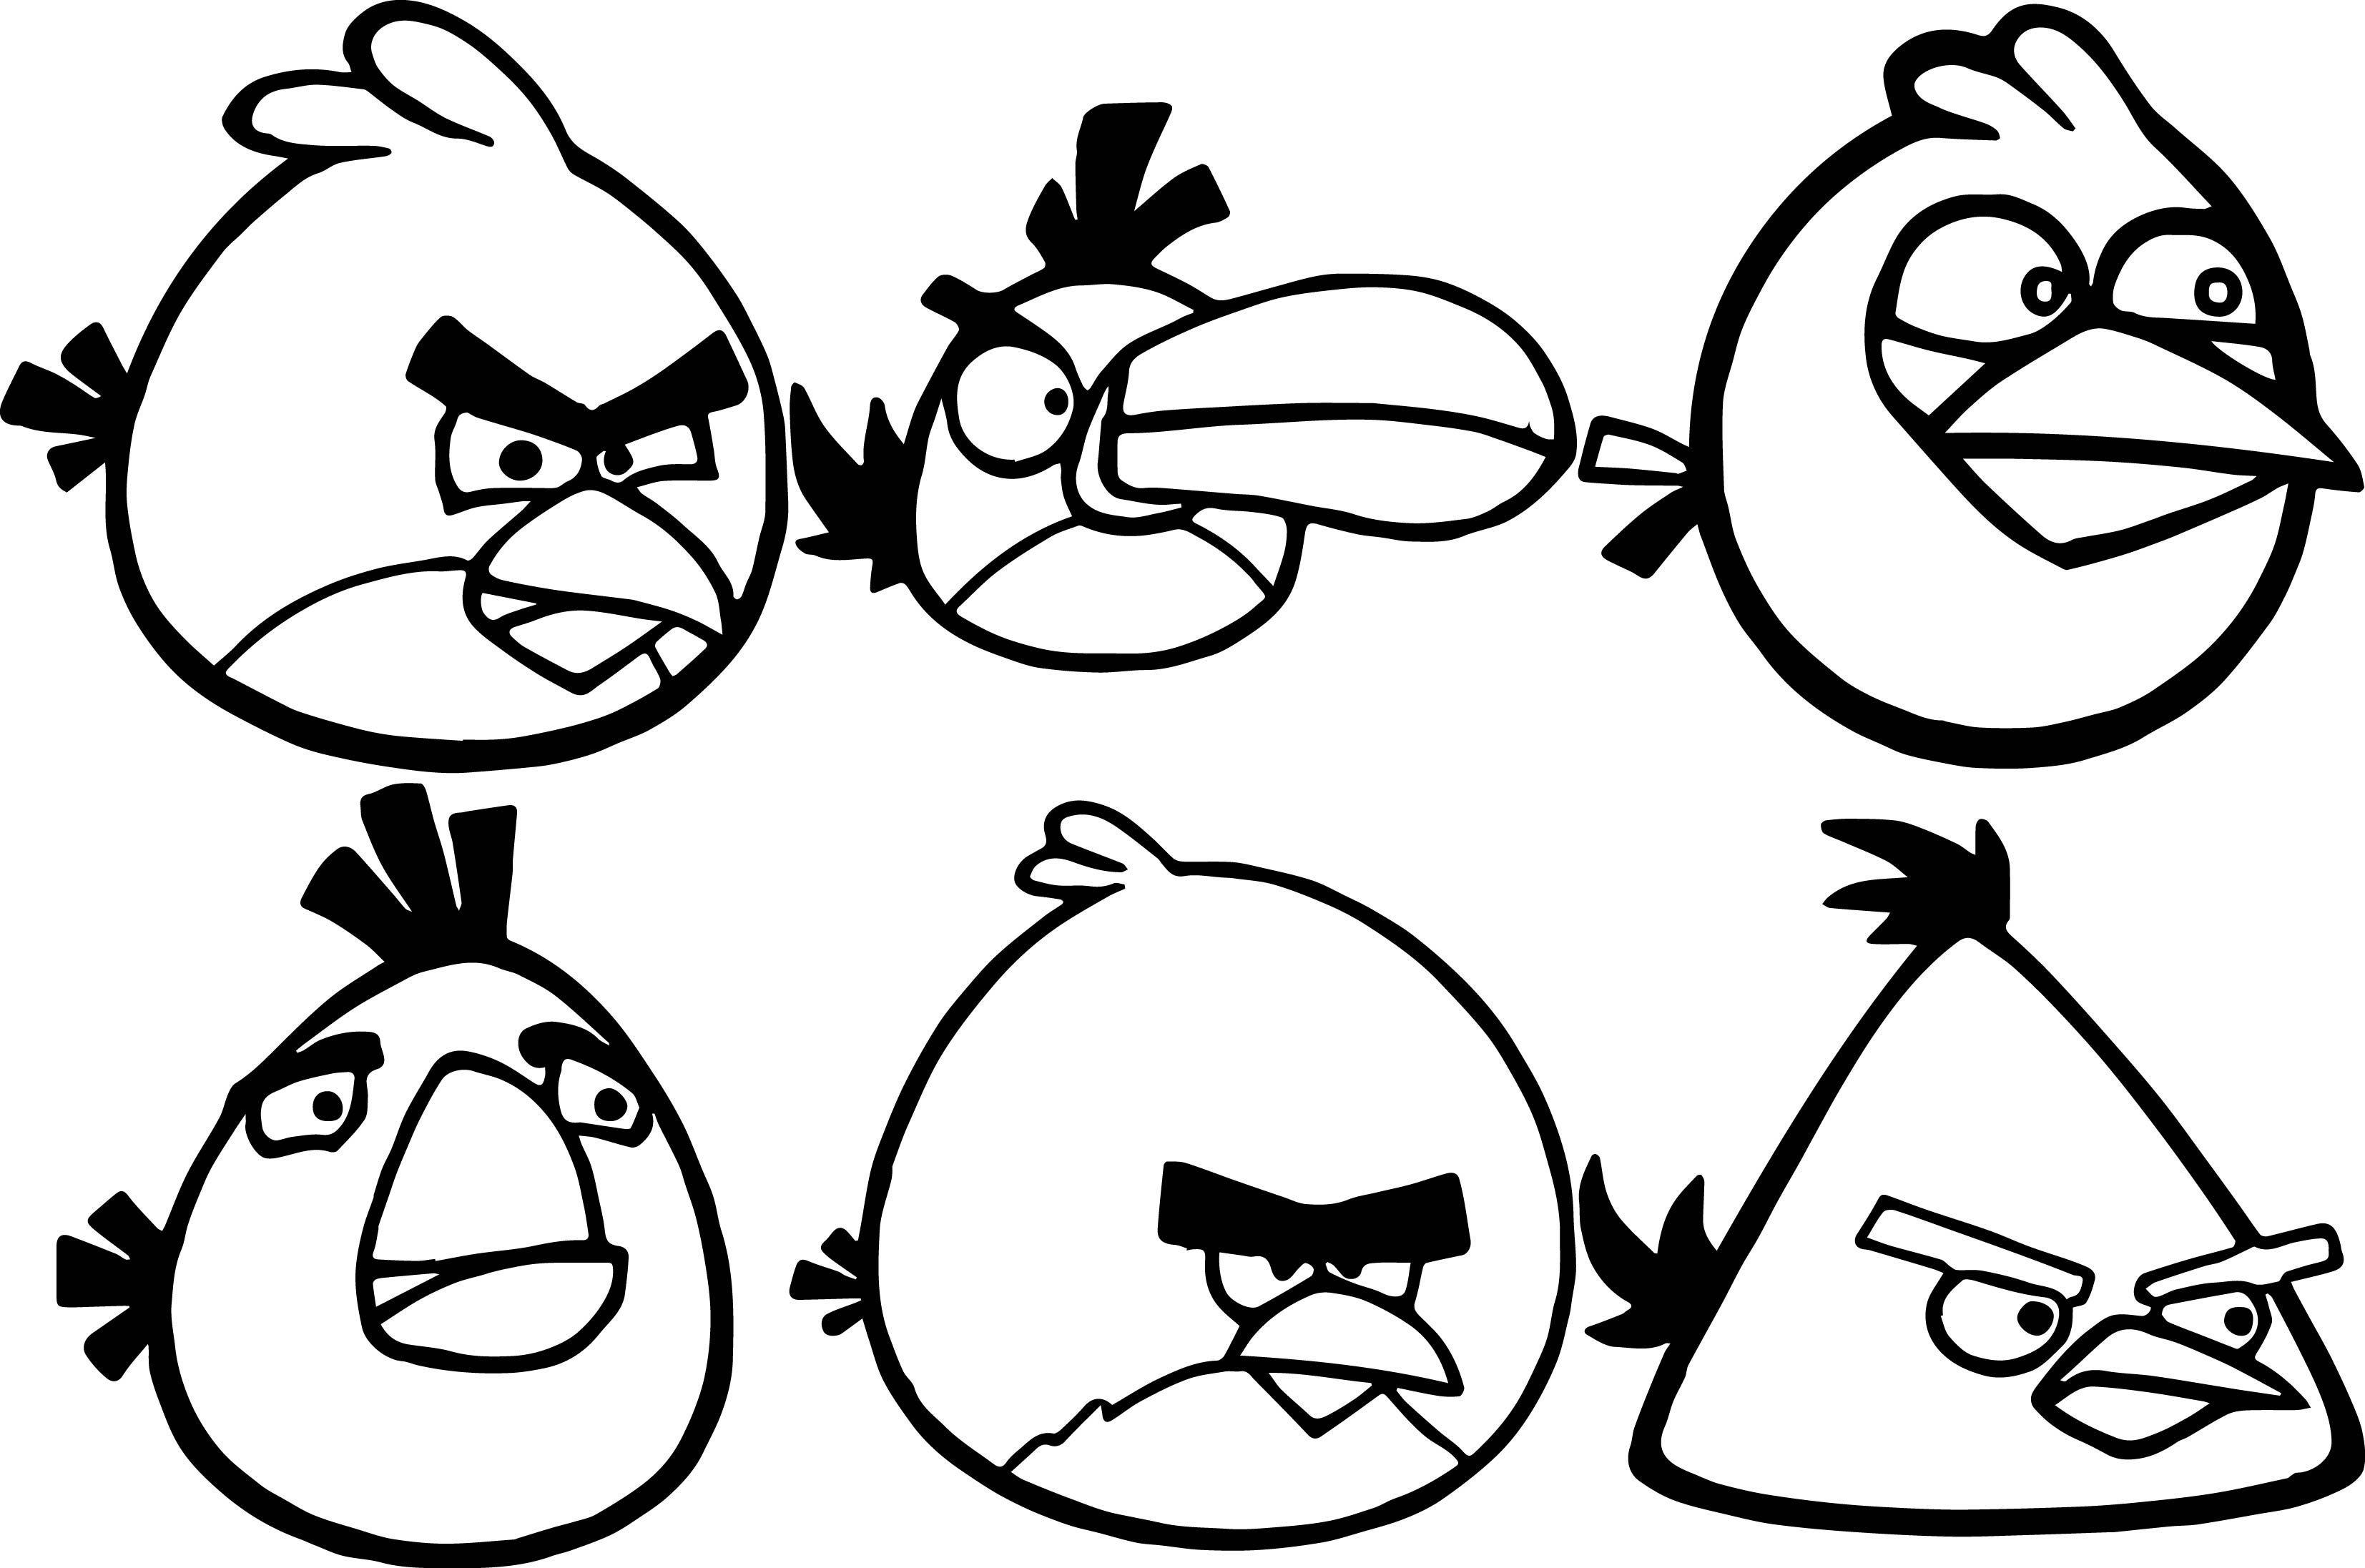 Angry Birds Coloring Page 219 | Wecoloringpage.com